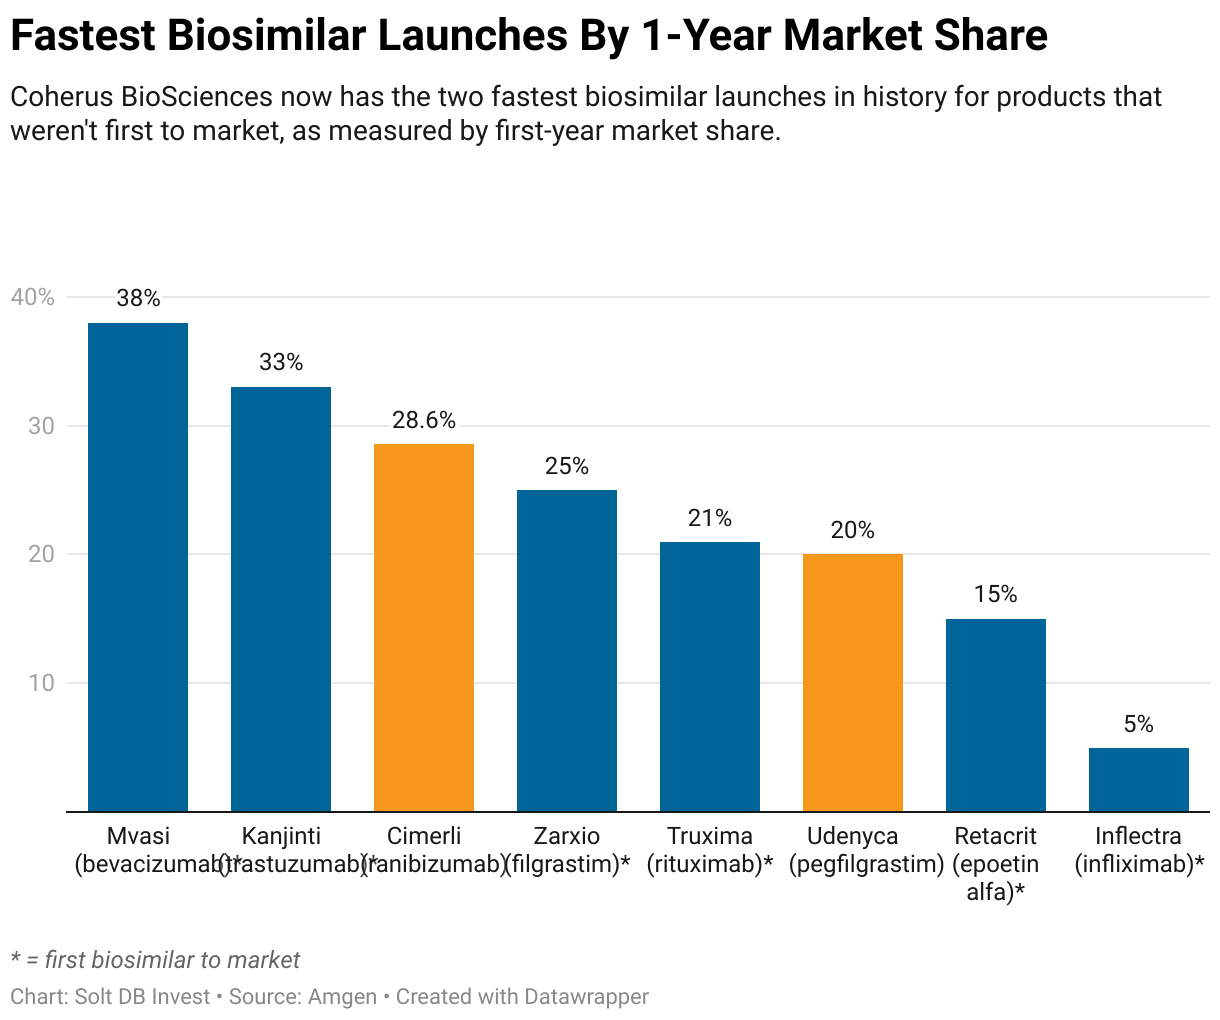 A column chart showing the market share after the first 12 months on the market for various biosimilars.